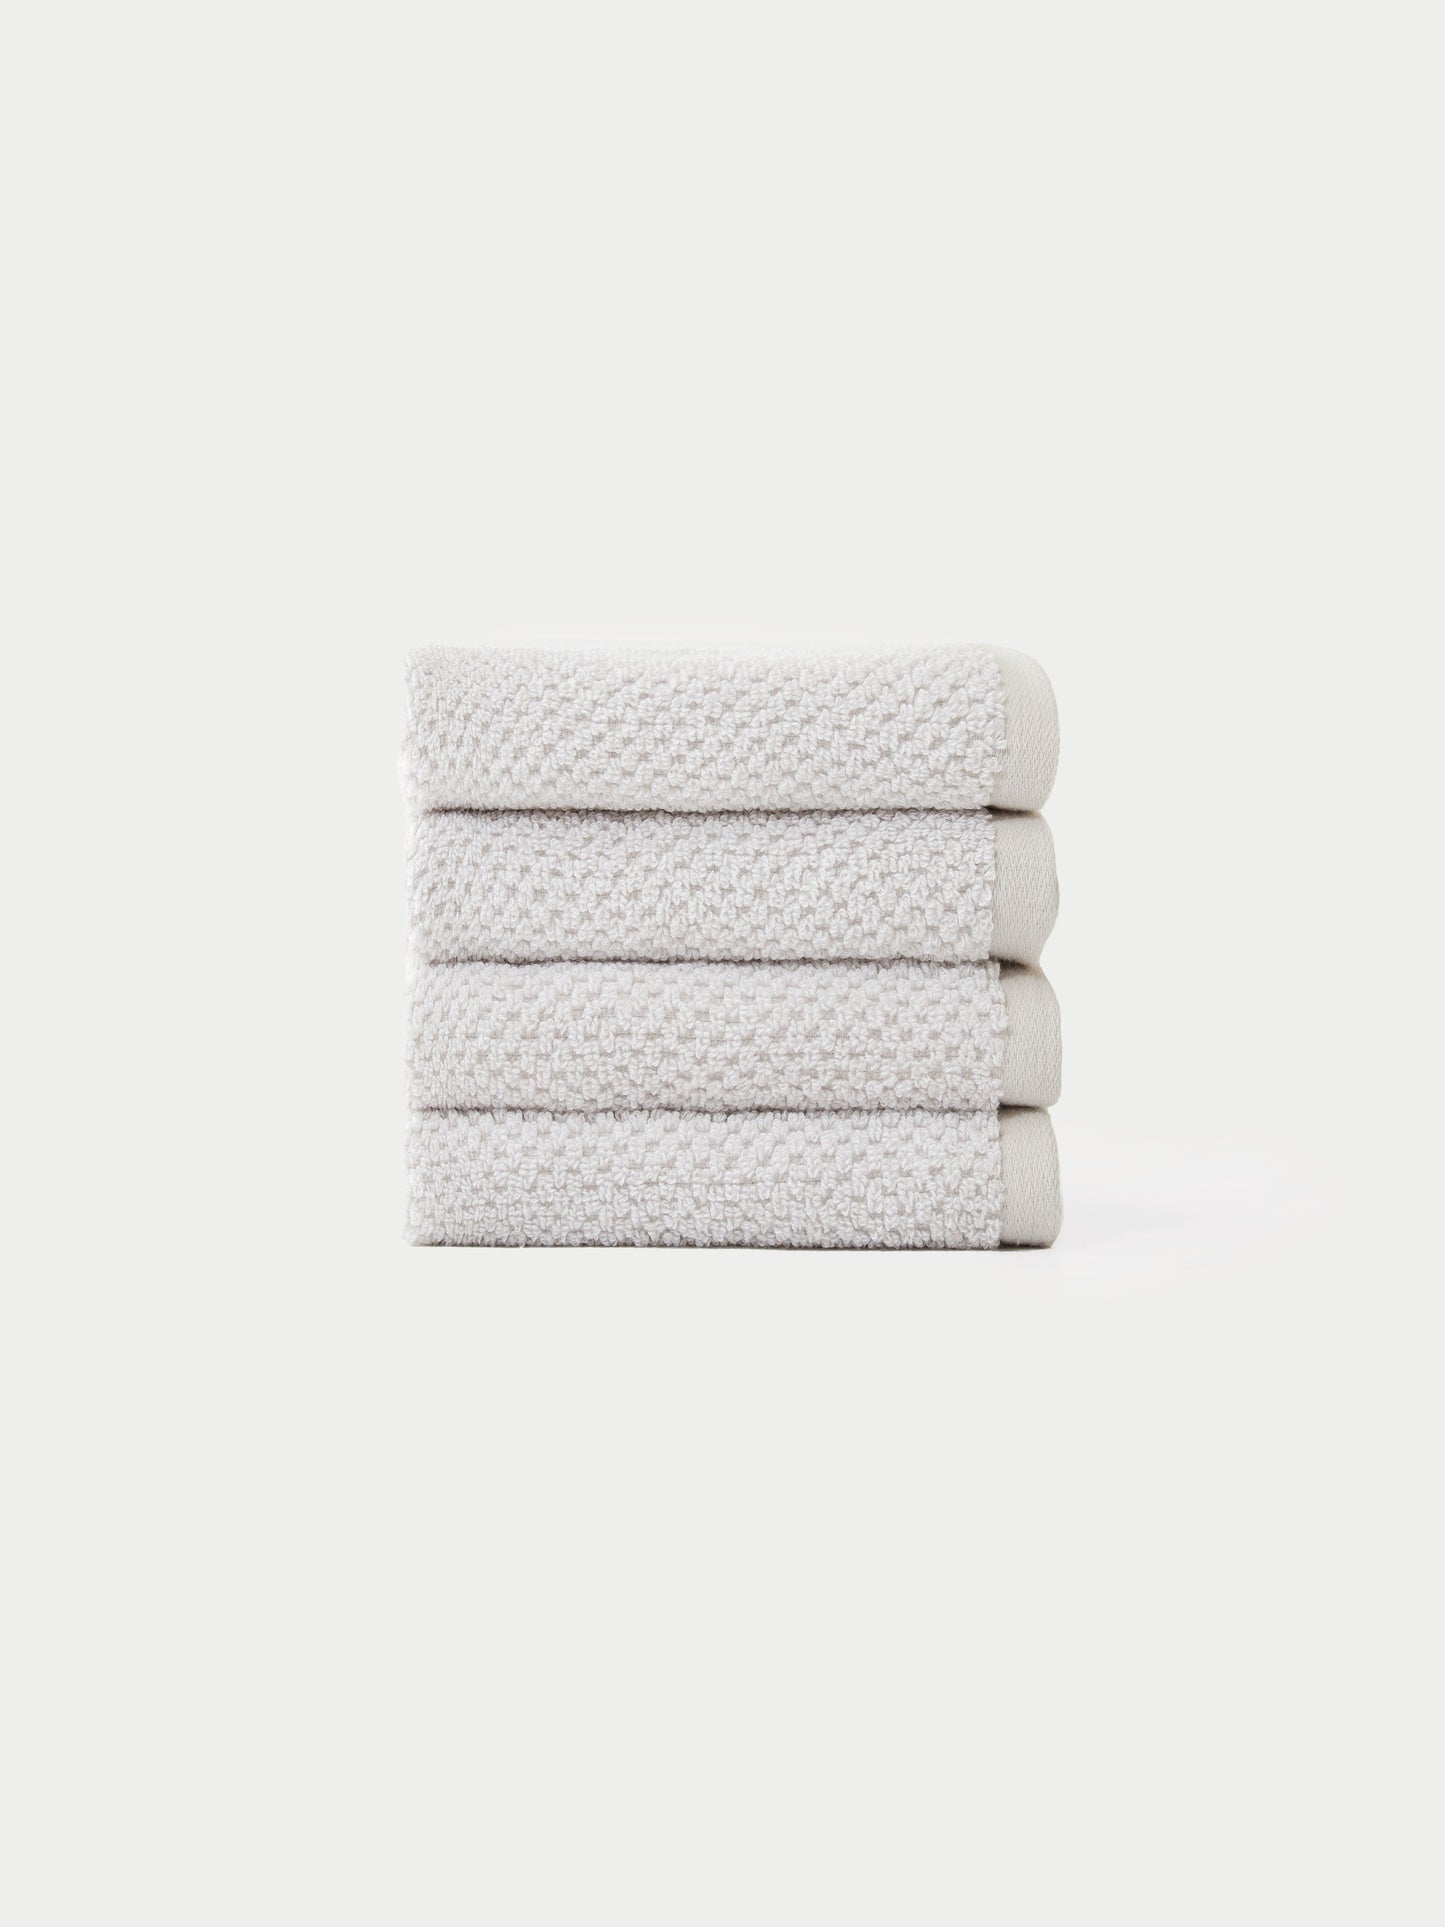 Nantucket Wash Cloths in the color Heathered Light Grey. The Wash Cloths are neatly folded. The photo of the wash cloths was taken with a white background.|Color:Heathered Light Grey